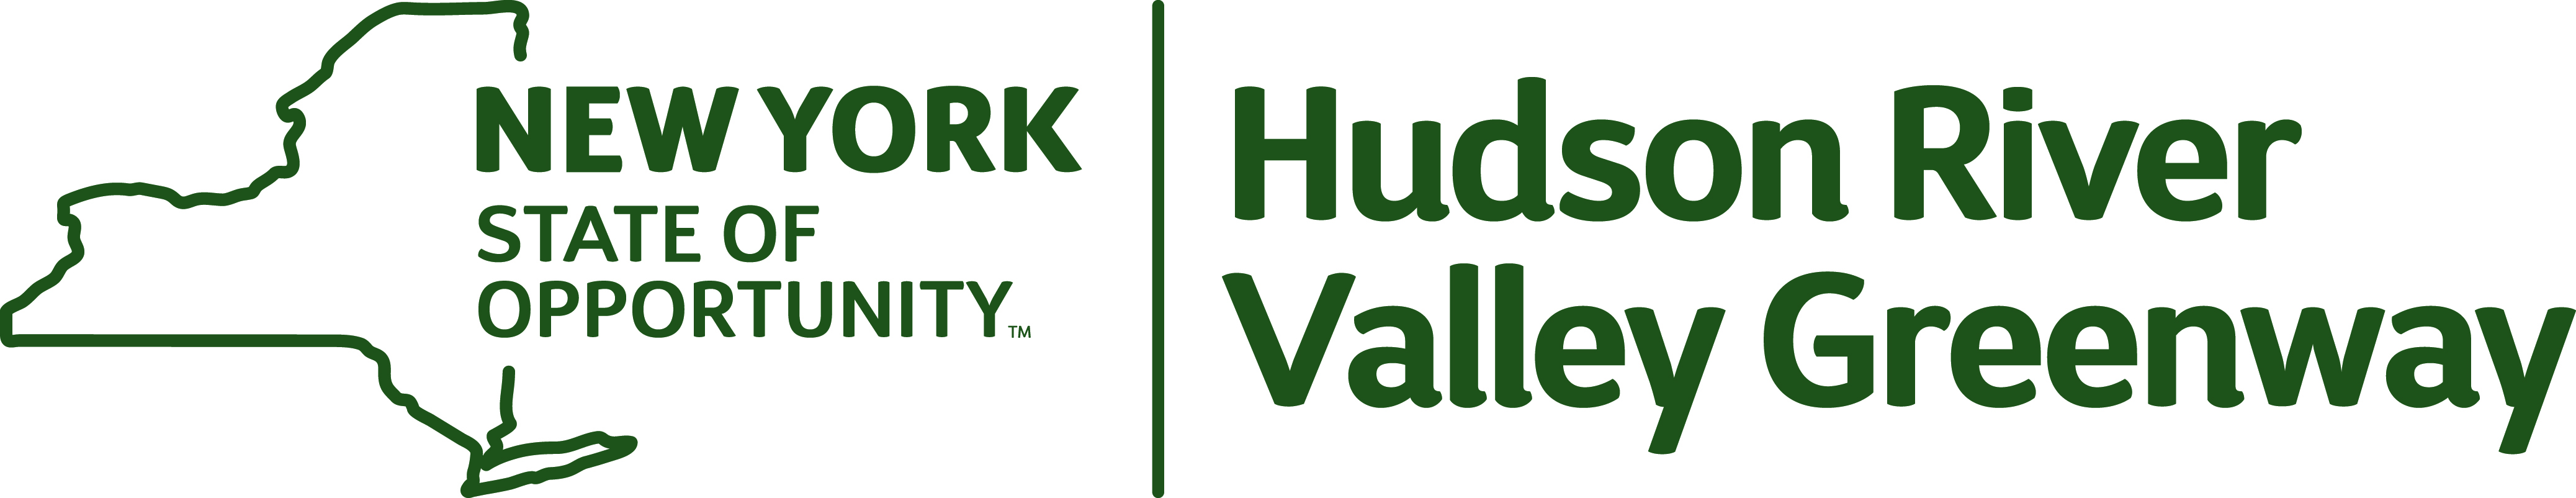 New York State of Opportunity | Hudson River Valley Greenway Logo